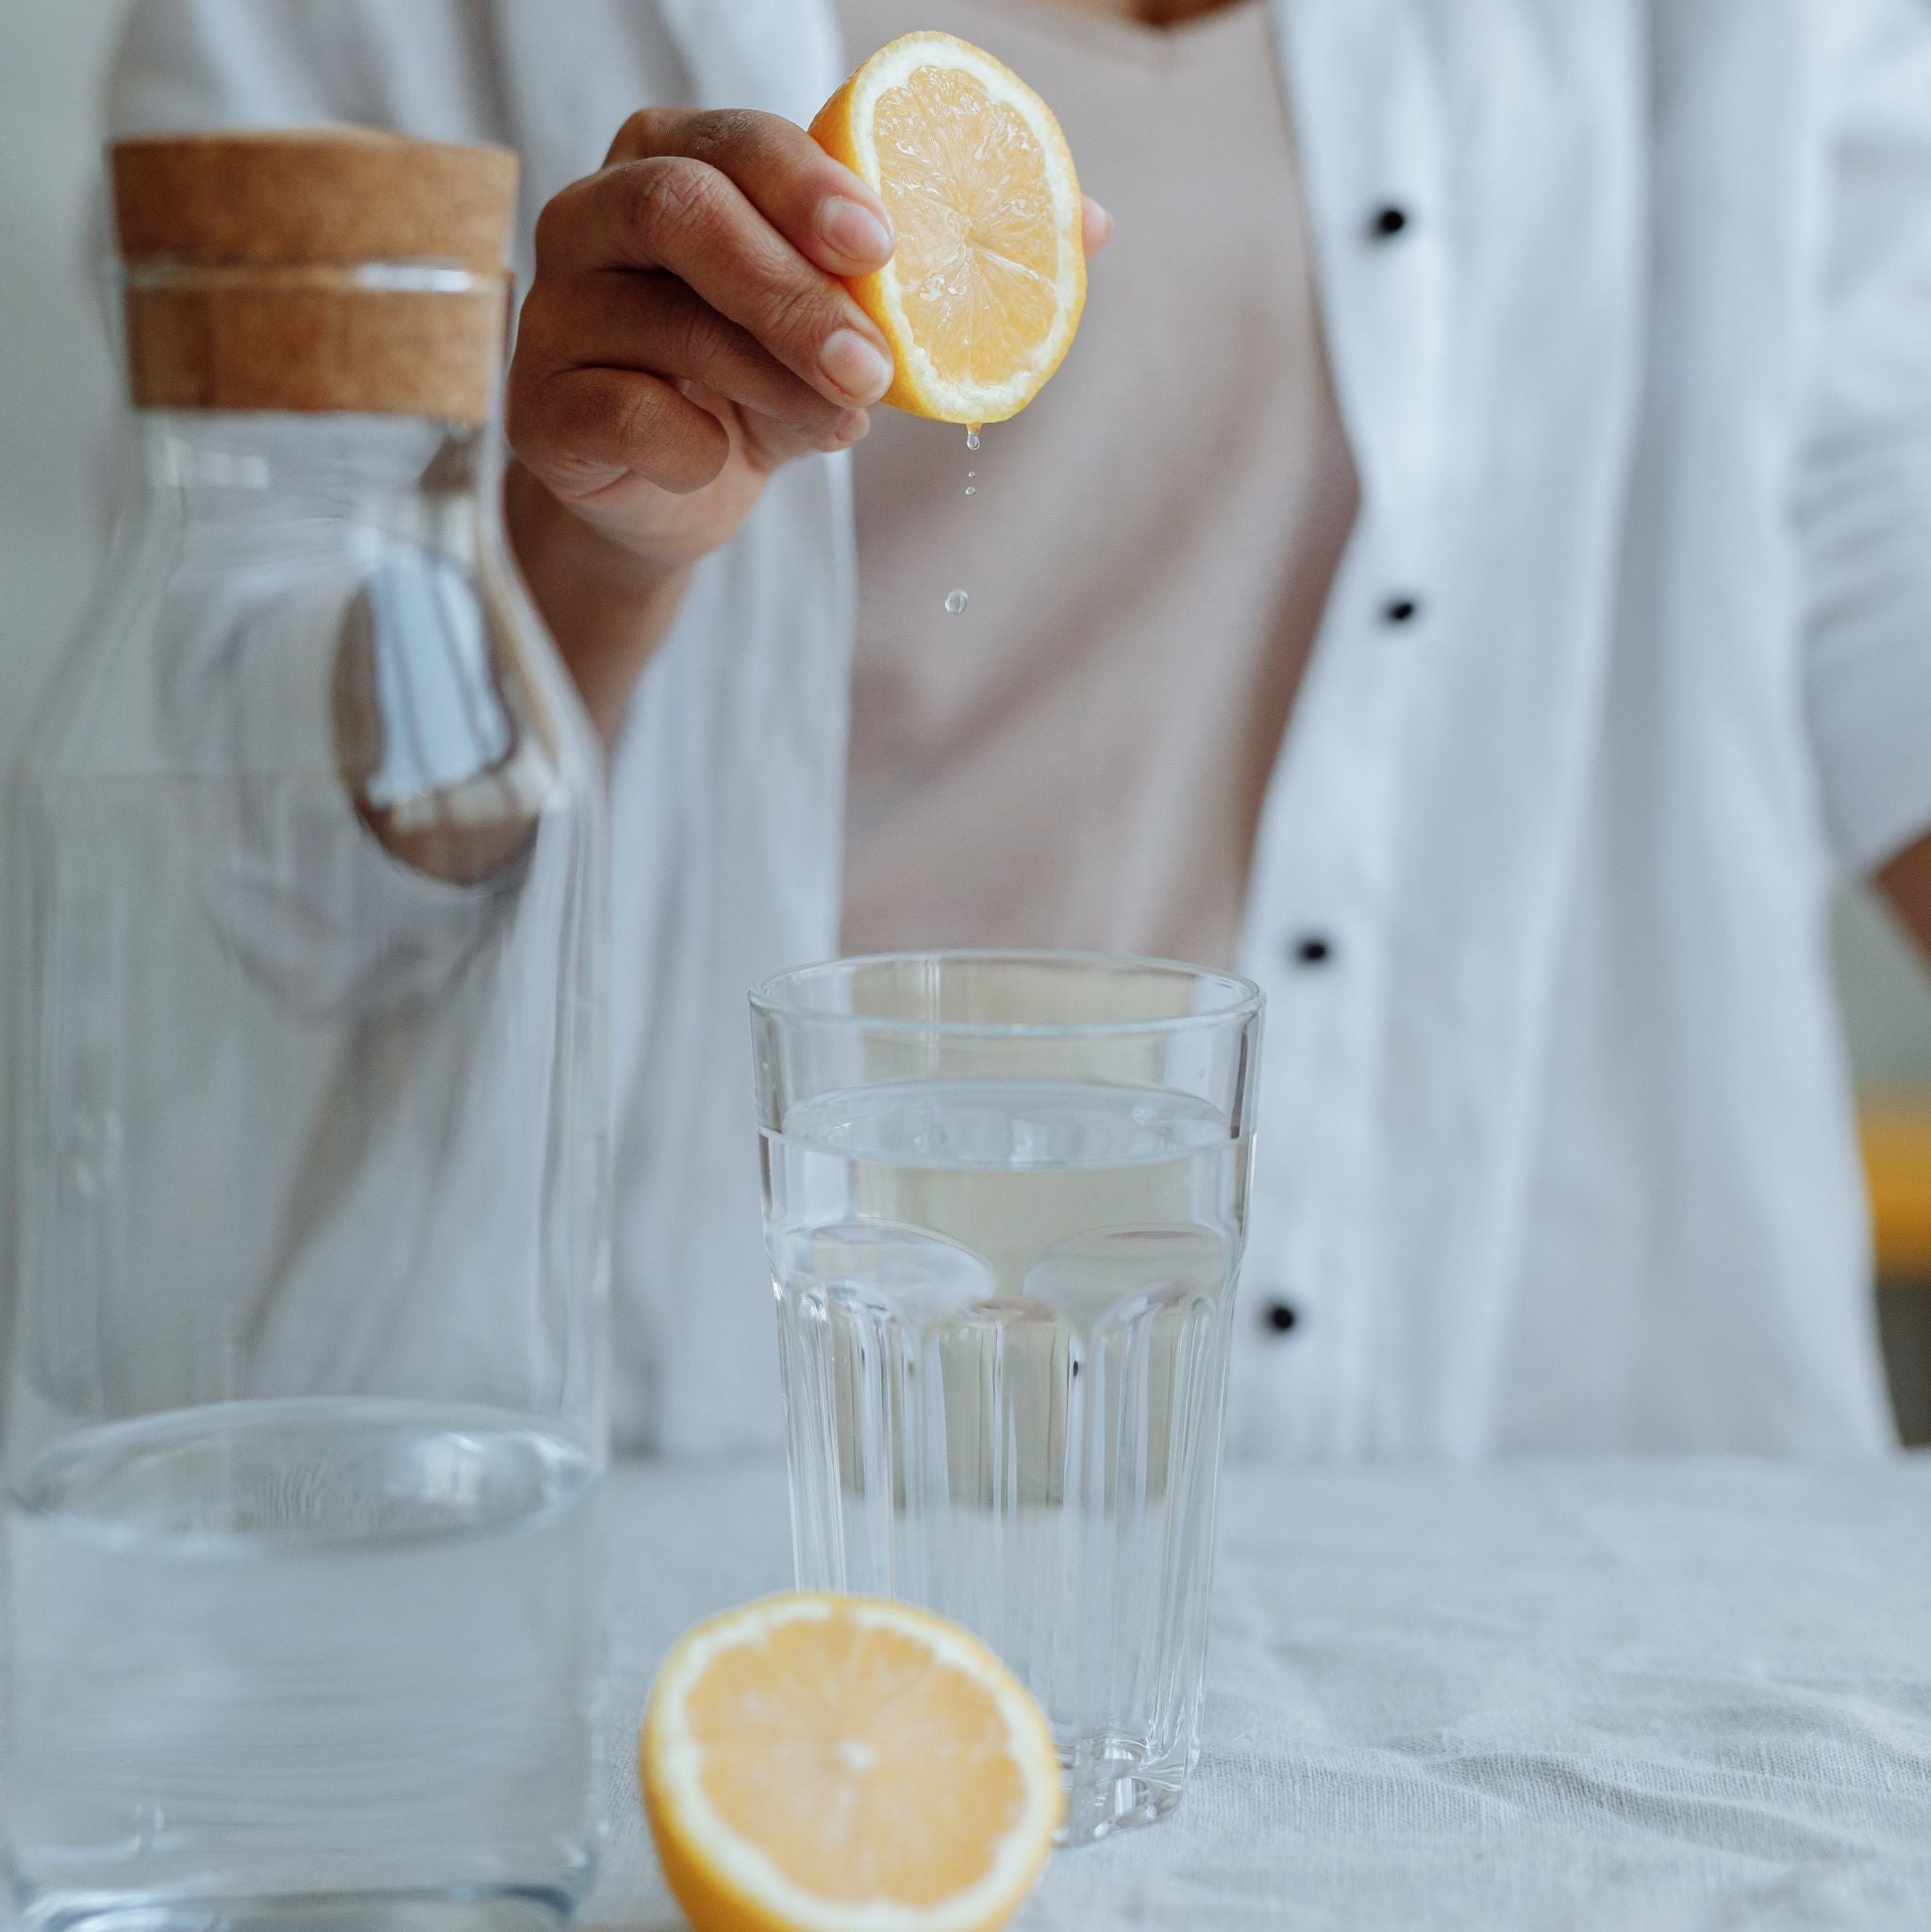 Woman squeezes lemon into glass, with beaker in the foreground